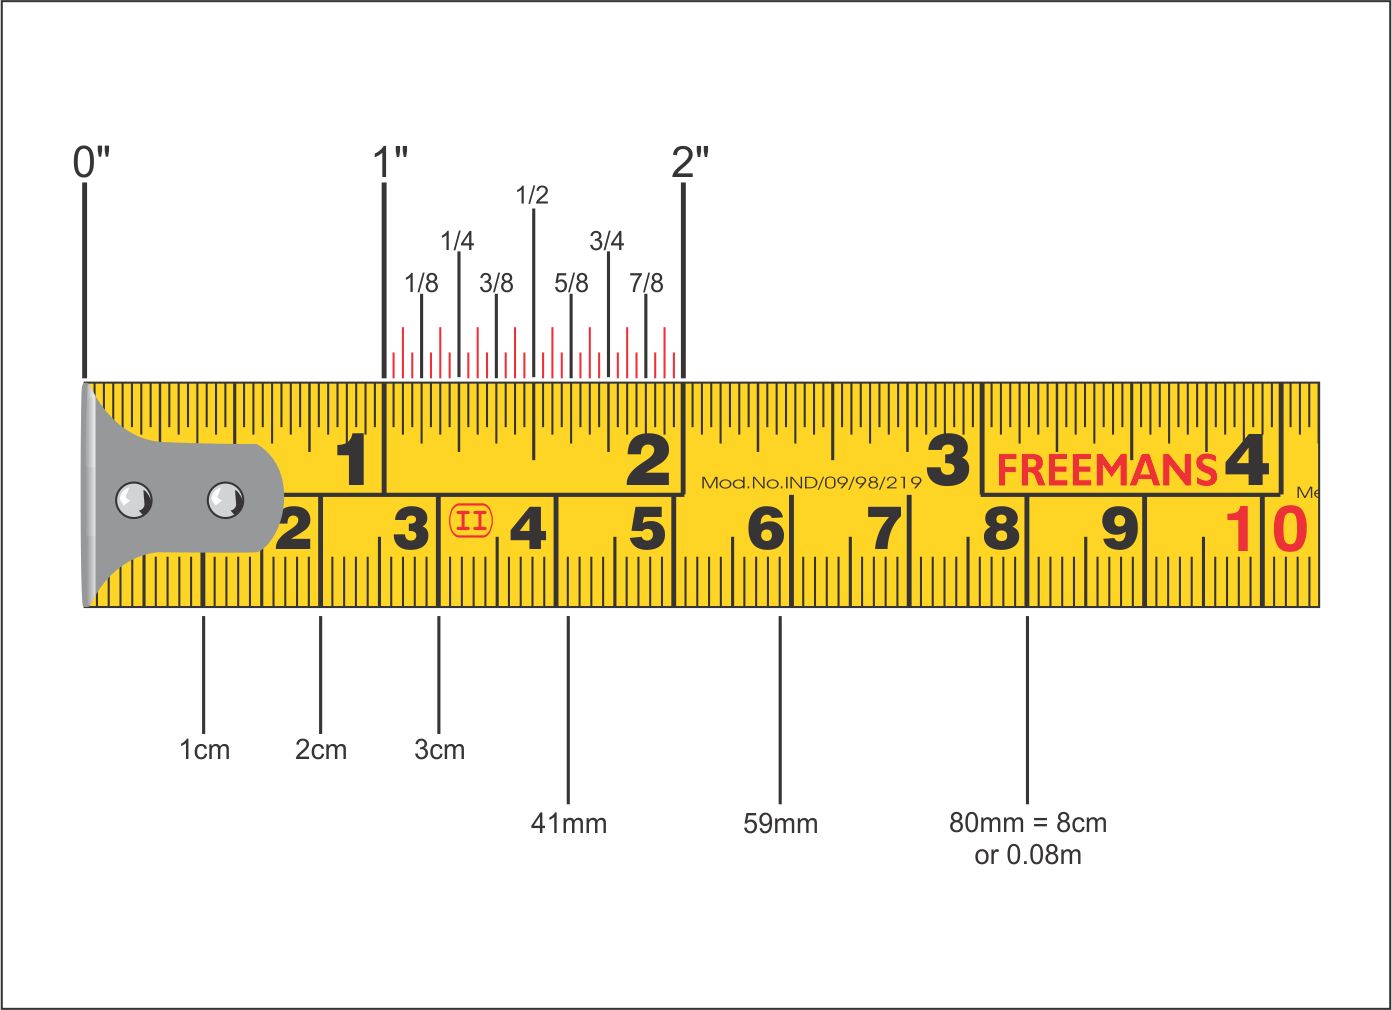 HOW TO: Easy way to read the tape measure accurately (Centimetres). 